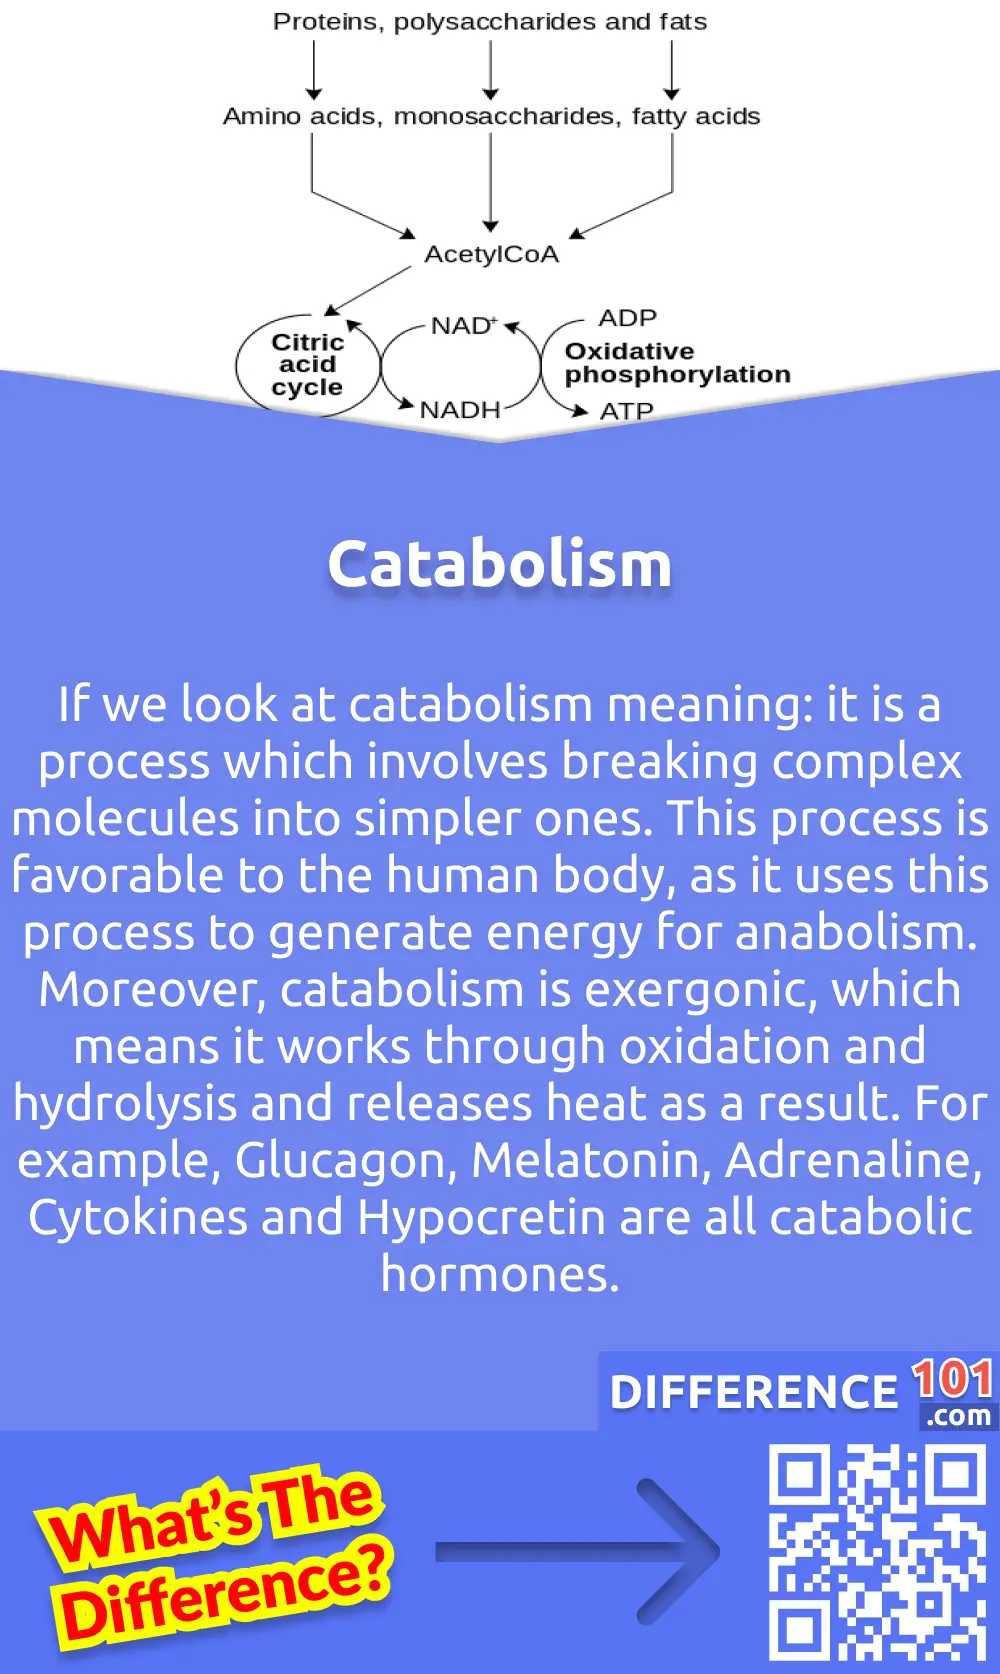 What is Catabolism? If we look at catabolism meaning: it is a process which involves breaking complex molecules into simpler ones. This process is favorable to the human body, as it uses this process to generate energy for anabolism. Moreover, catabolism is exergonic, which means it works through oxidation and hydrolysis and releases heat as a result. There are several hormones which are the result of catabolism-controlling signals. For example, Glucagon, Melatonin, Adrenaline, Cytokines and Hypocretin are all catabolic hormones. Exercises like cardio workouts are catabolic exercises which burn calories by breaking down fats. The cells store various complex molecules and raw materials, which break down into new products during catabolism. For example, in the catabolism of polysaccharides, the protein and nucleic acids form amino acids, nucleotides and monosaccharides.